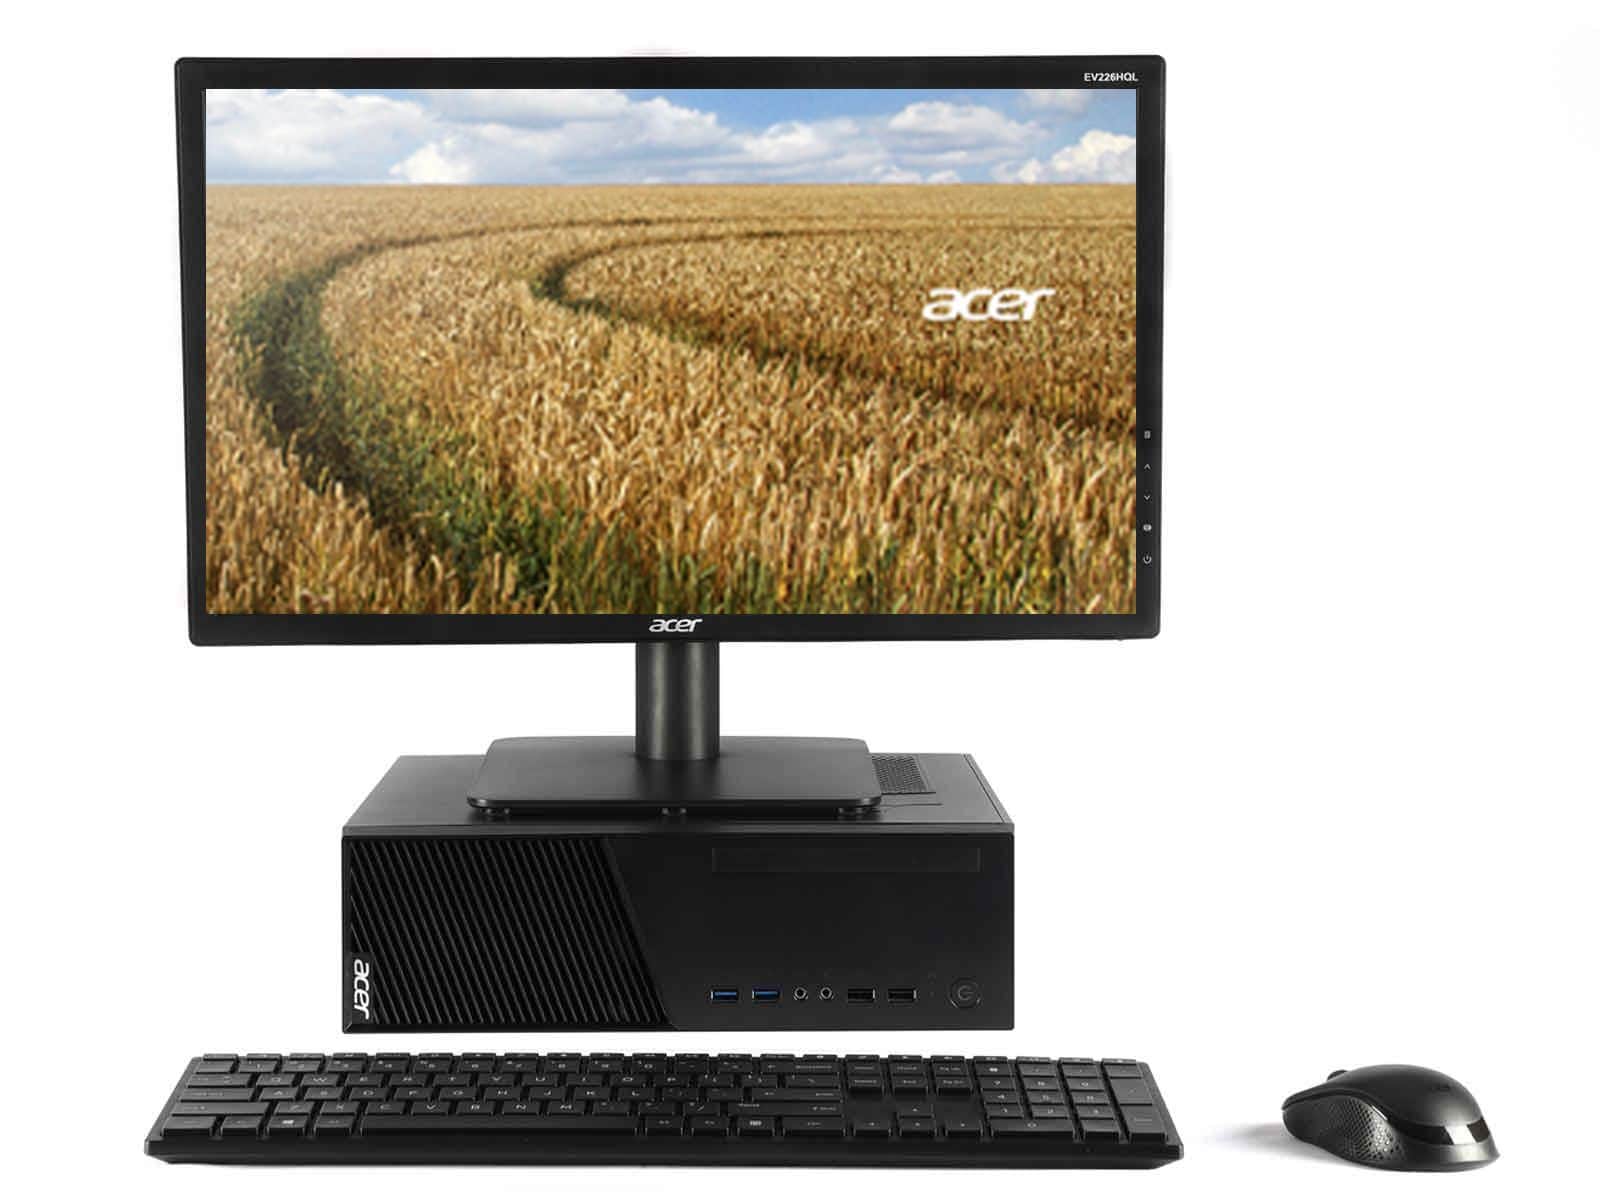 Acer Veriton Business Desktop with Inch Monitor